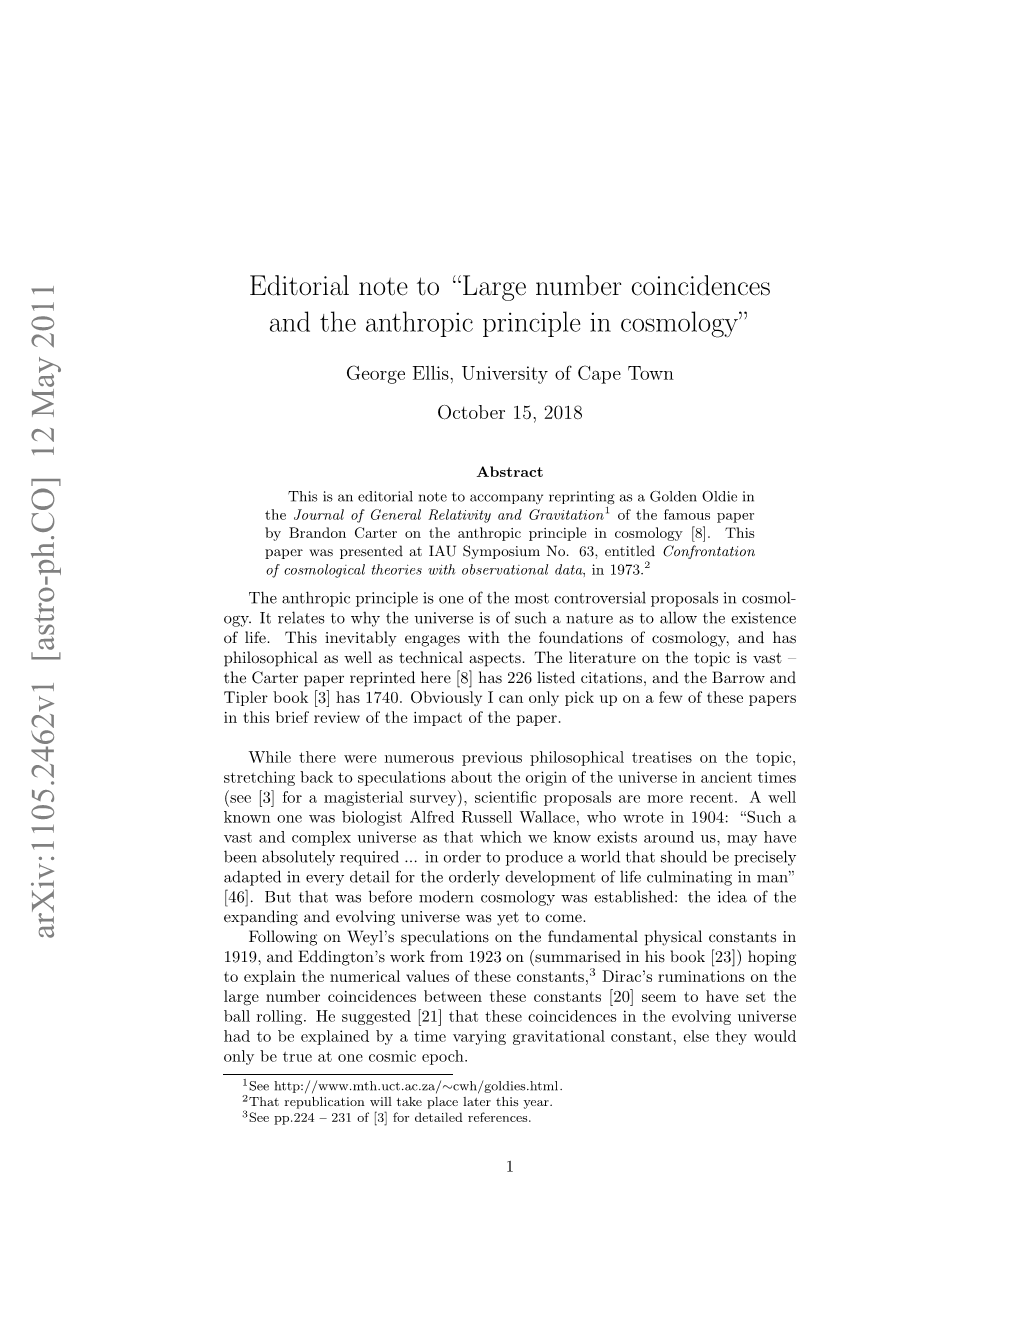 Editorial Note To" Large Number Coincidences and the Anthropic Principle in Cosmology"